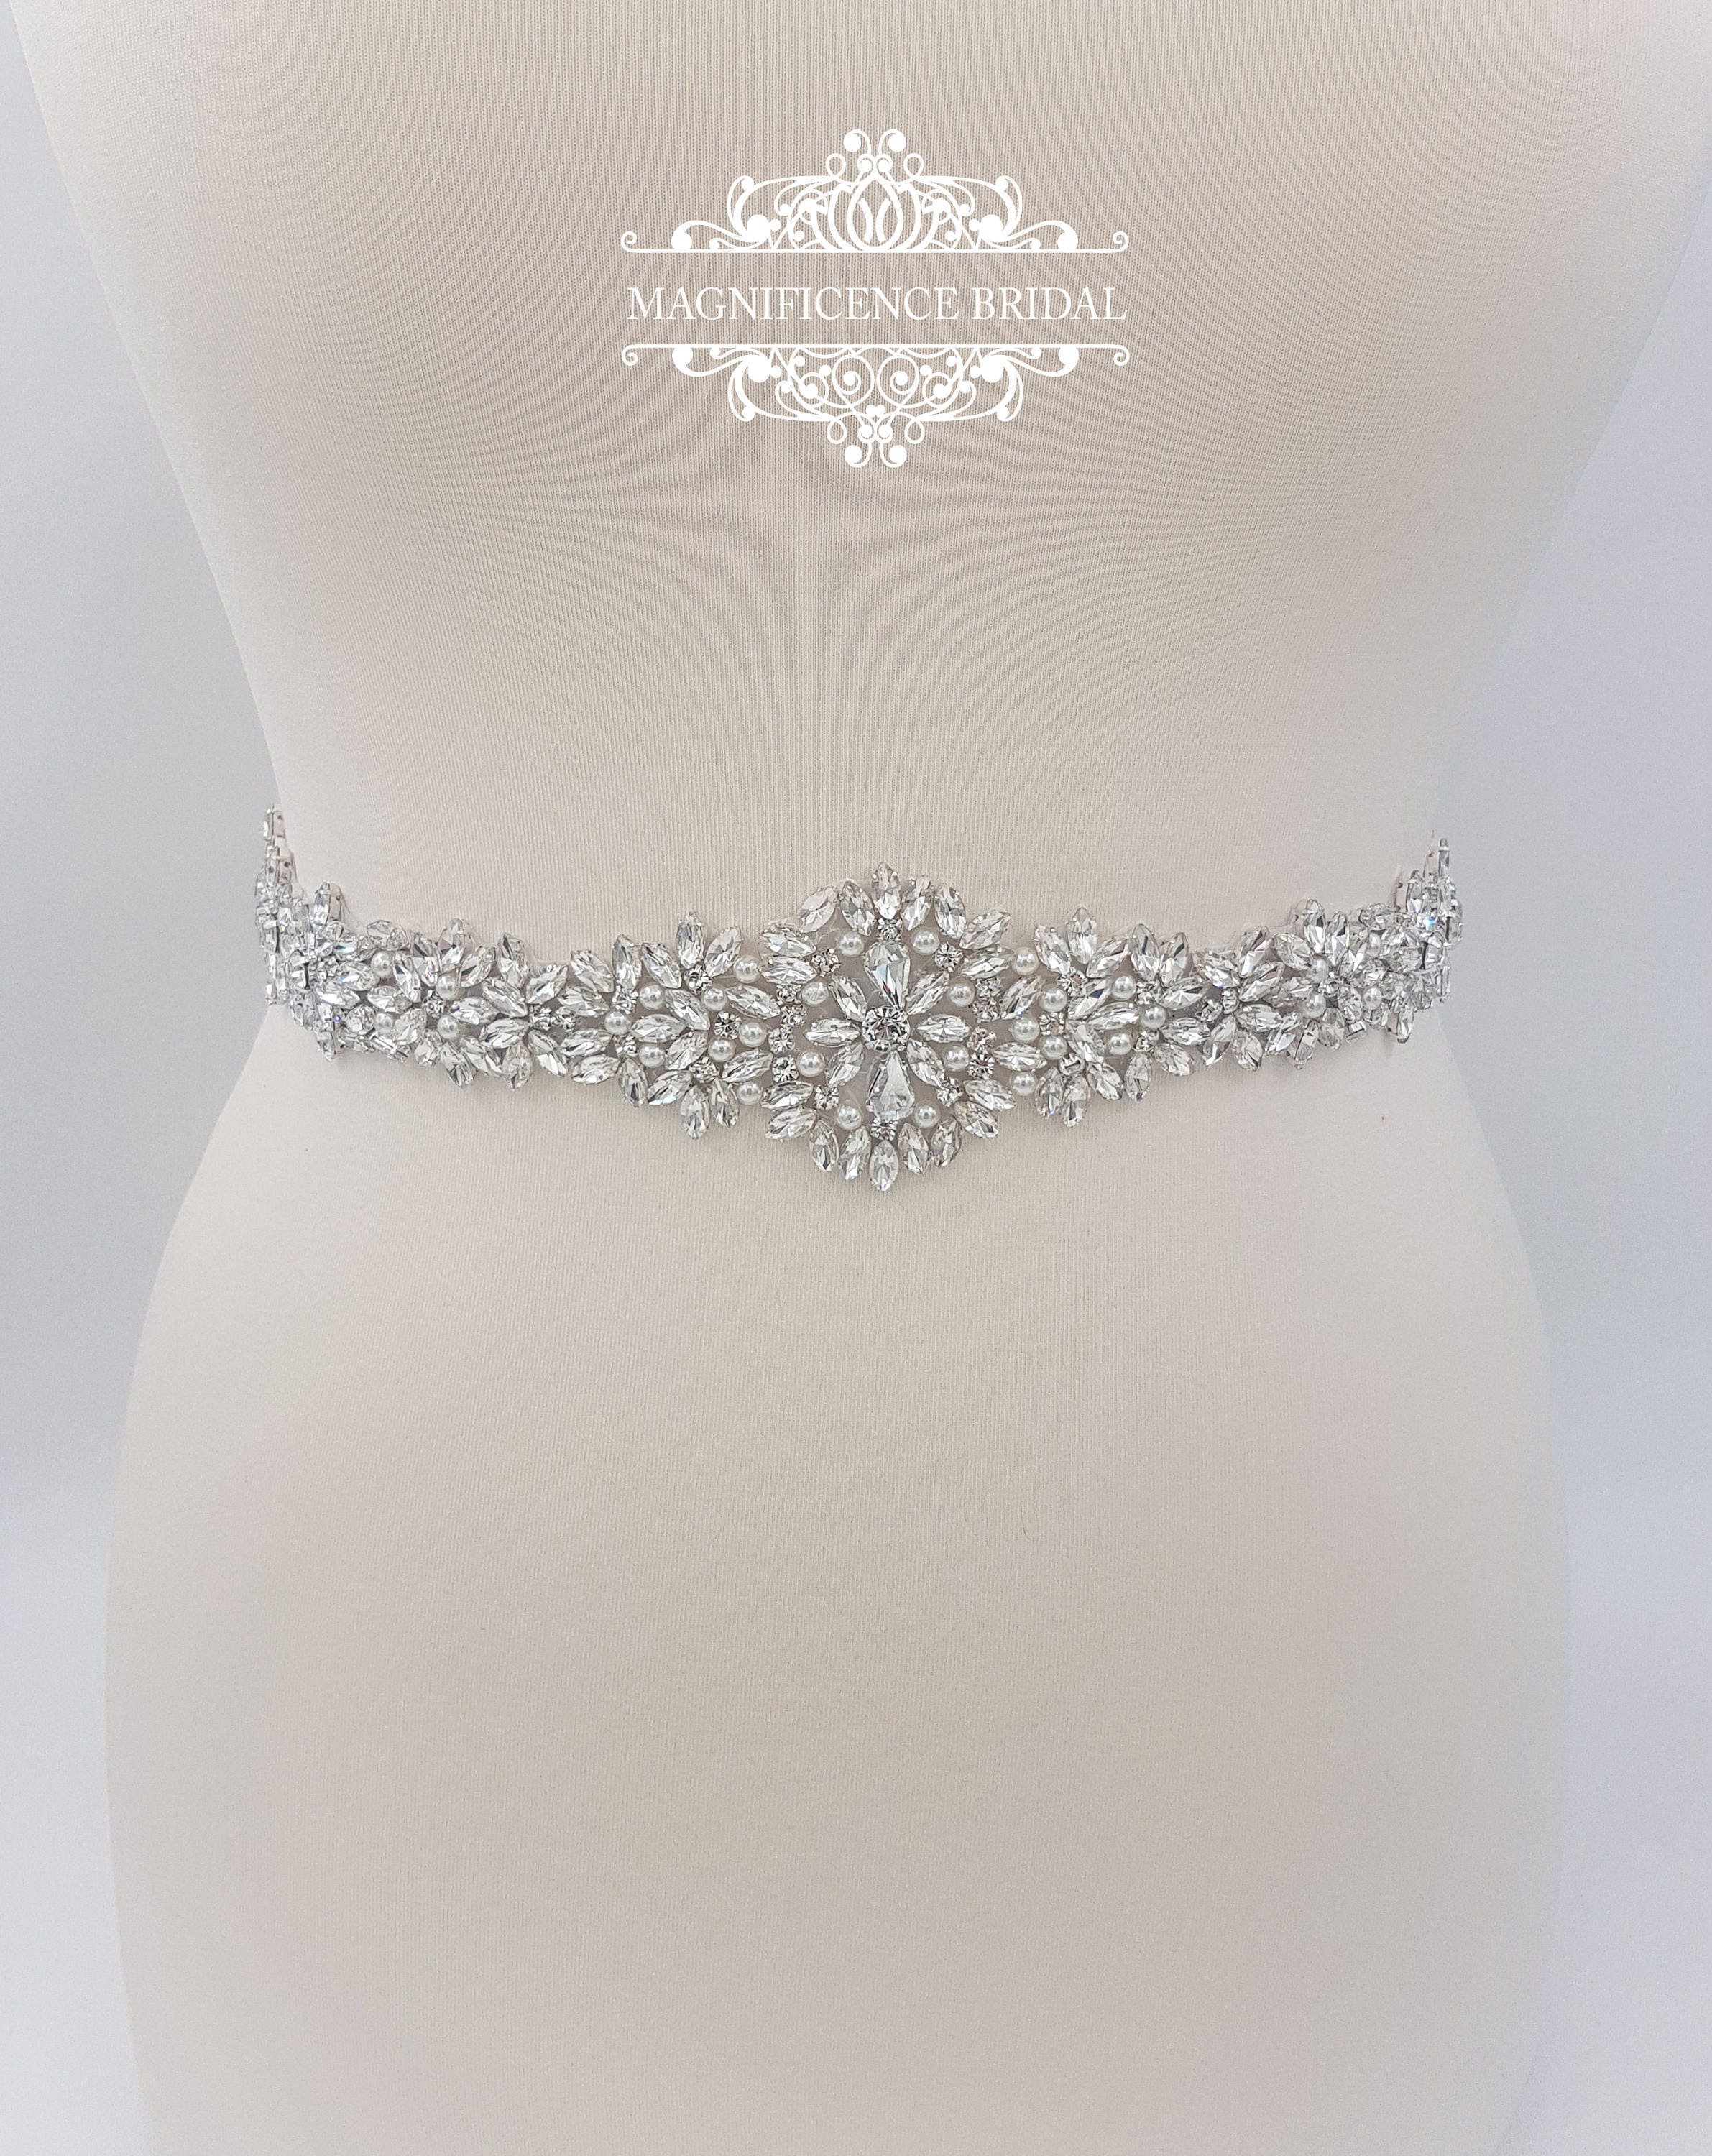 Best Diamante Wedding Dress Belt in the world Check it out now 